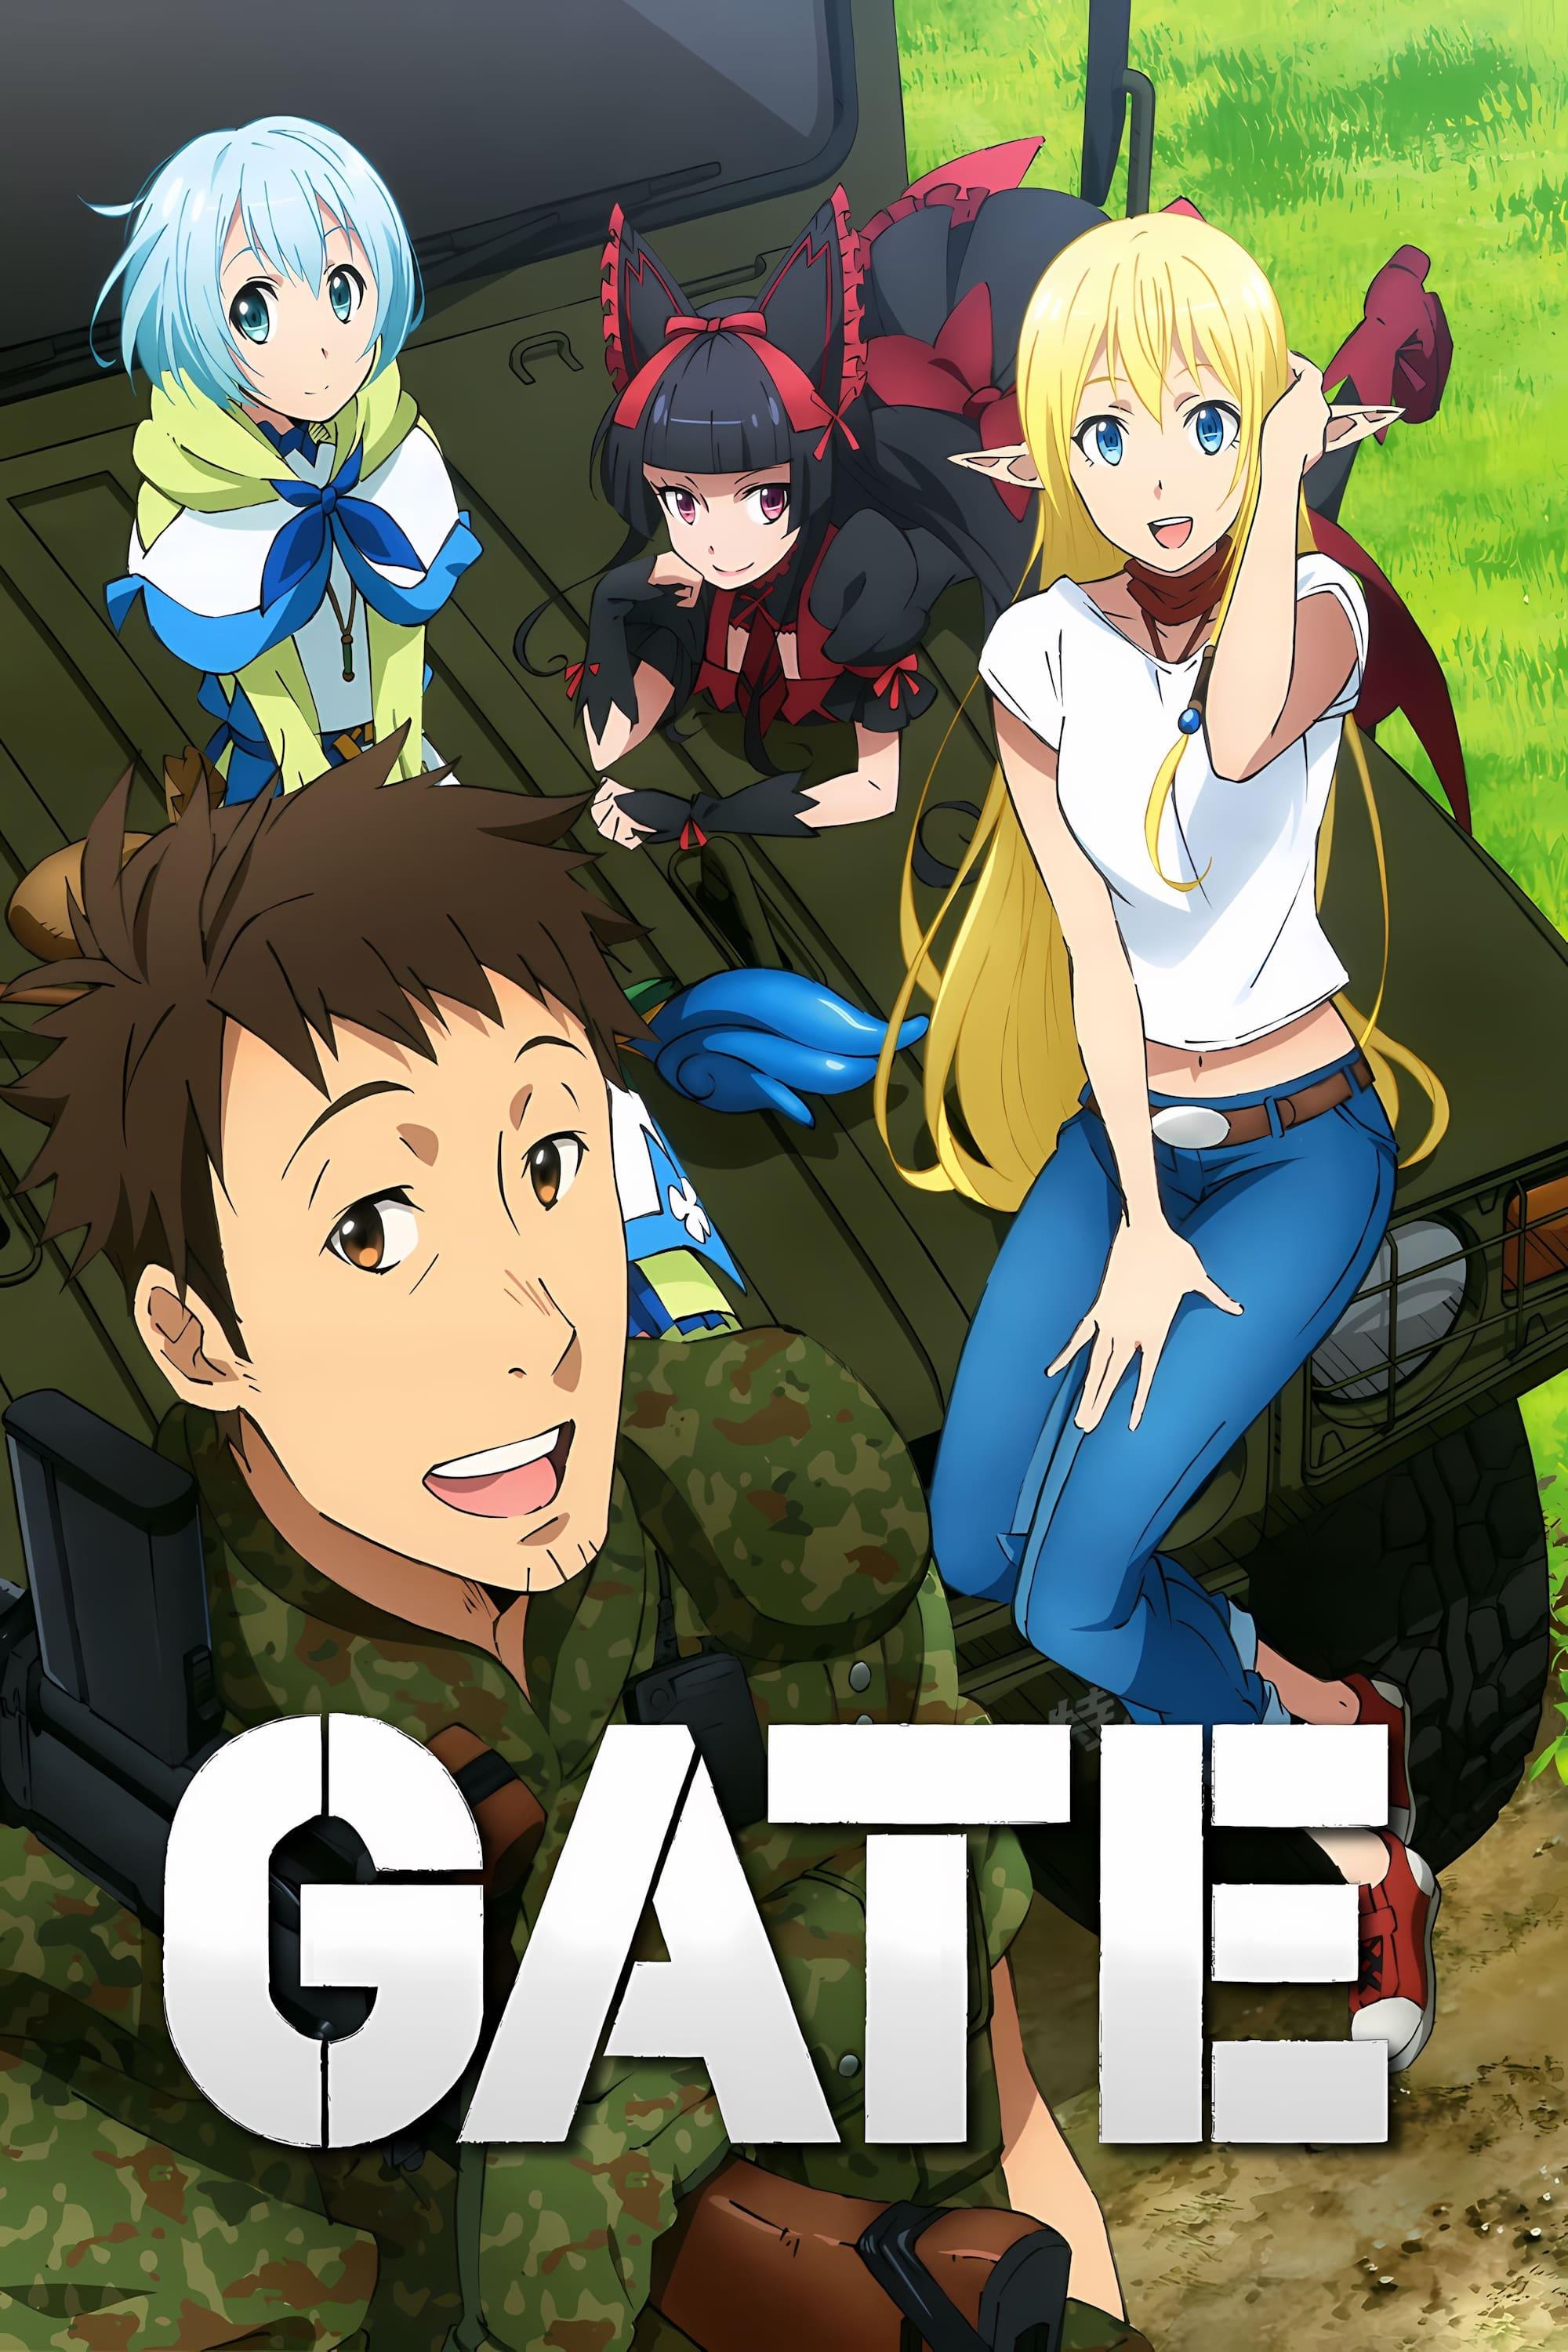 Gate poster